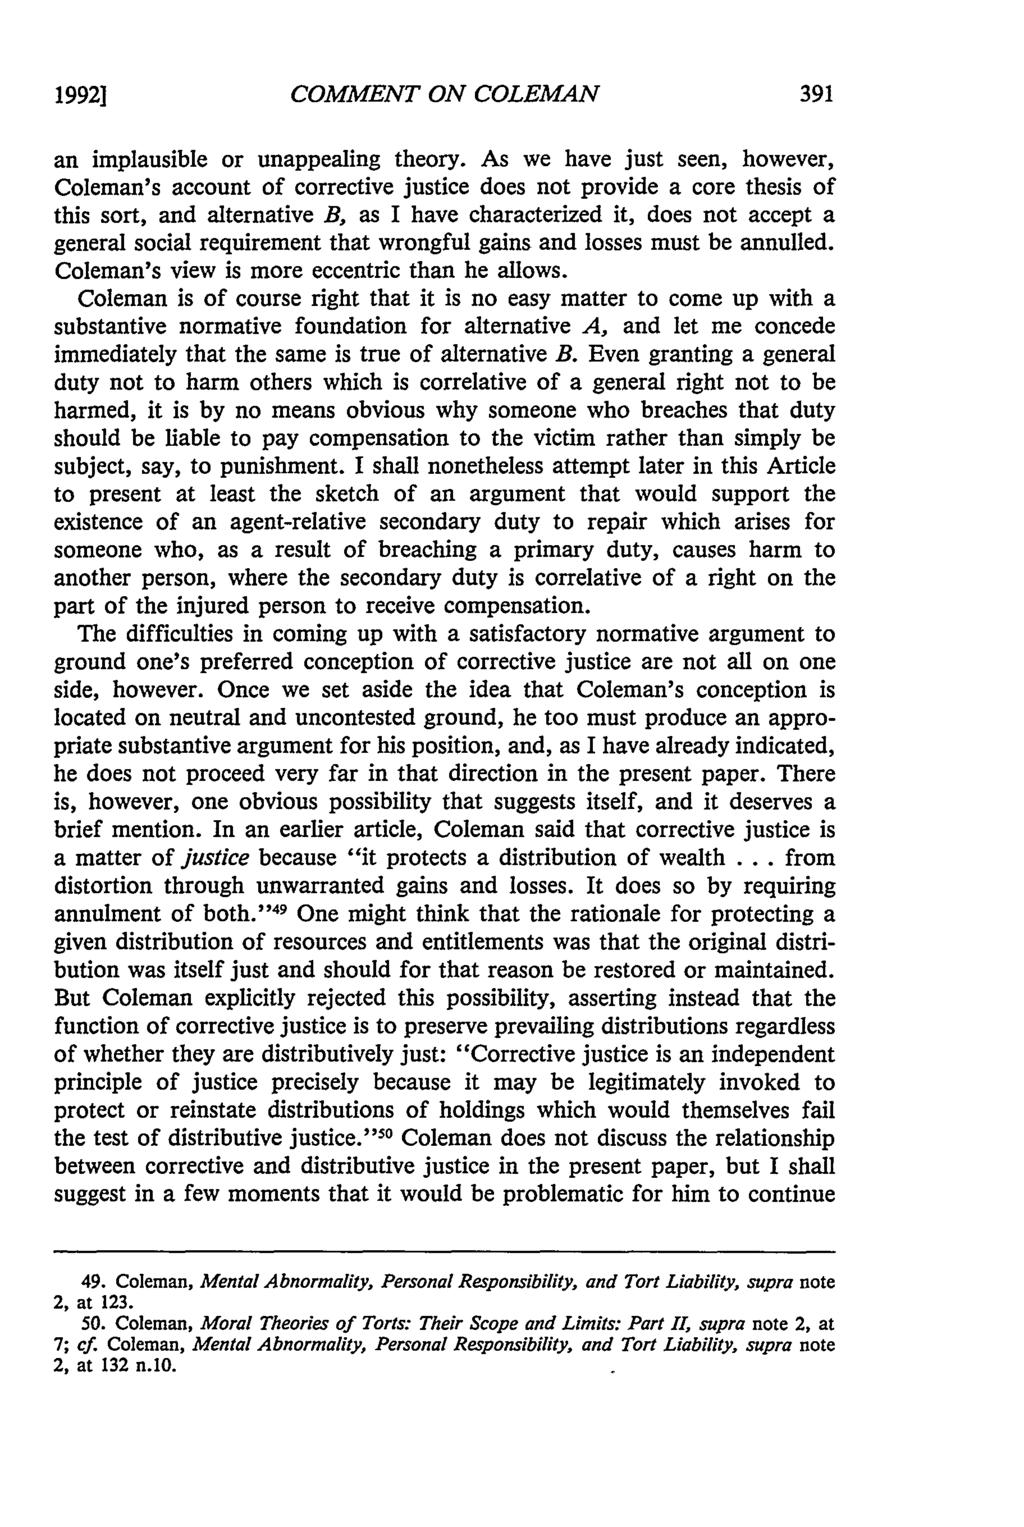 1992] COMMENT ON COLEMAN an implausible or unappealing theory.